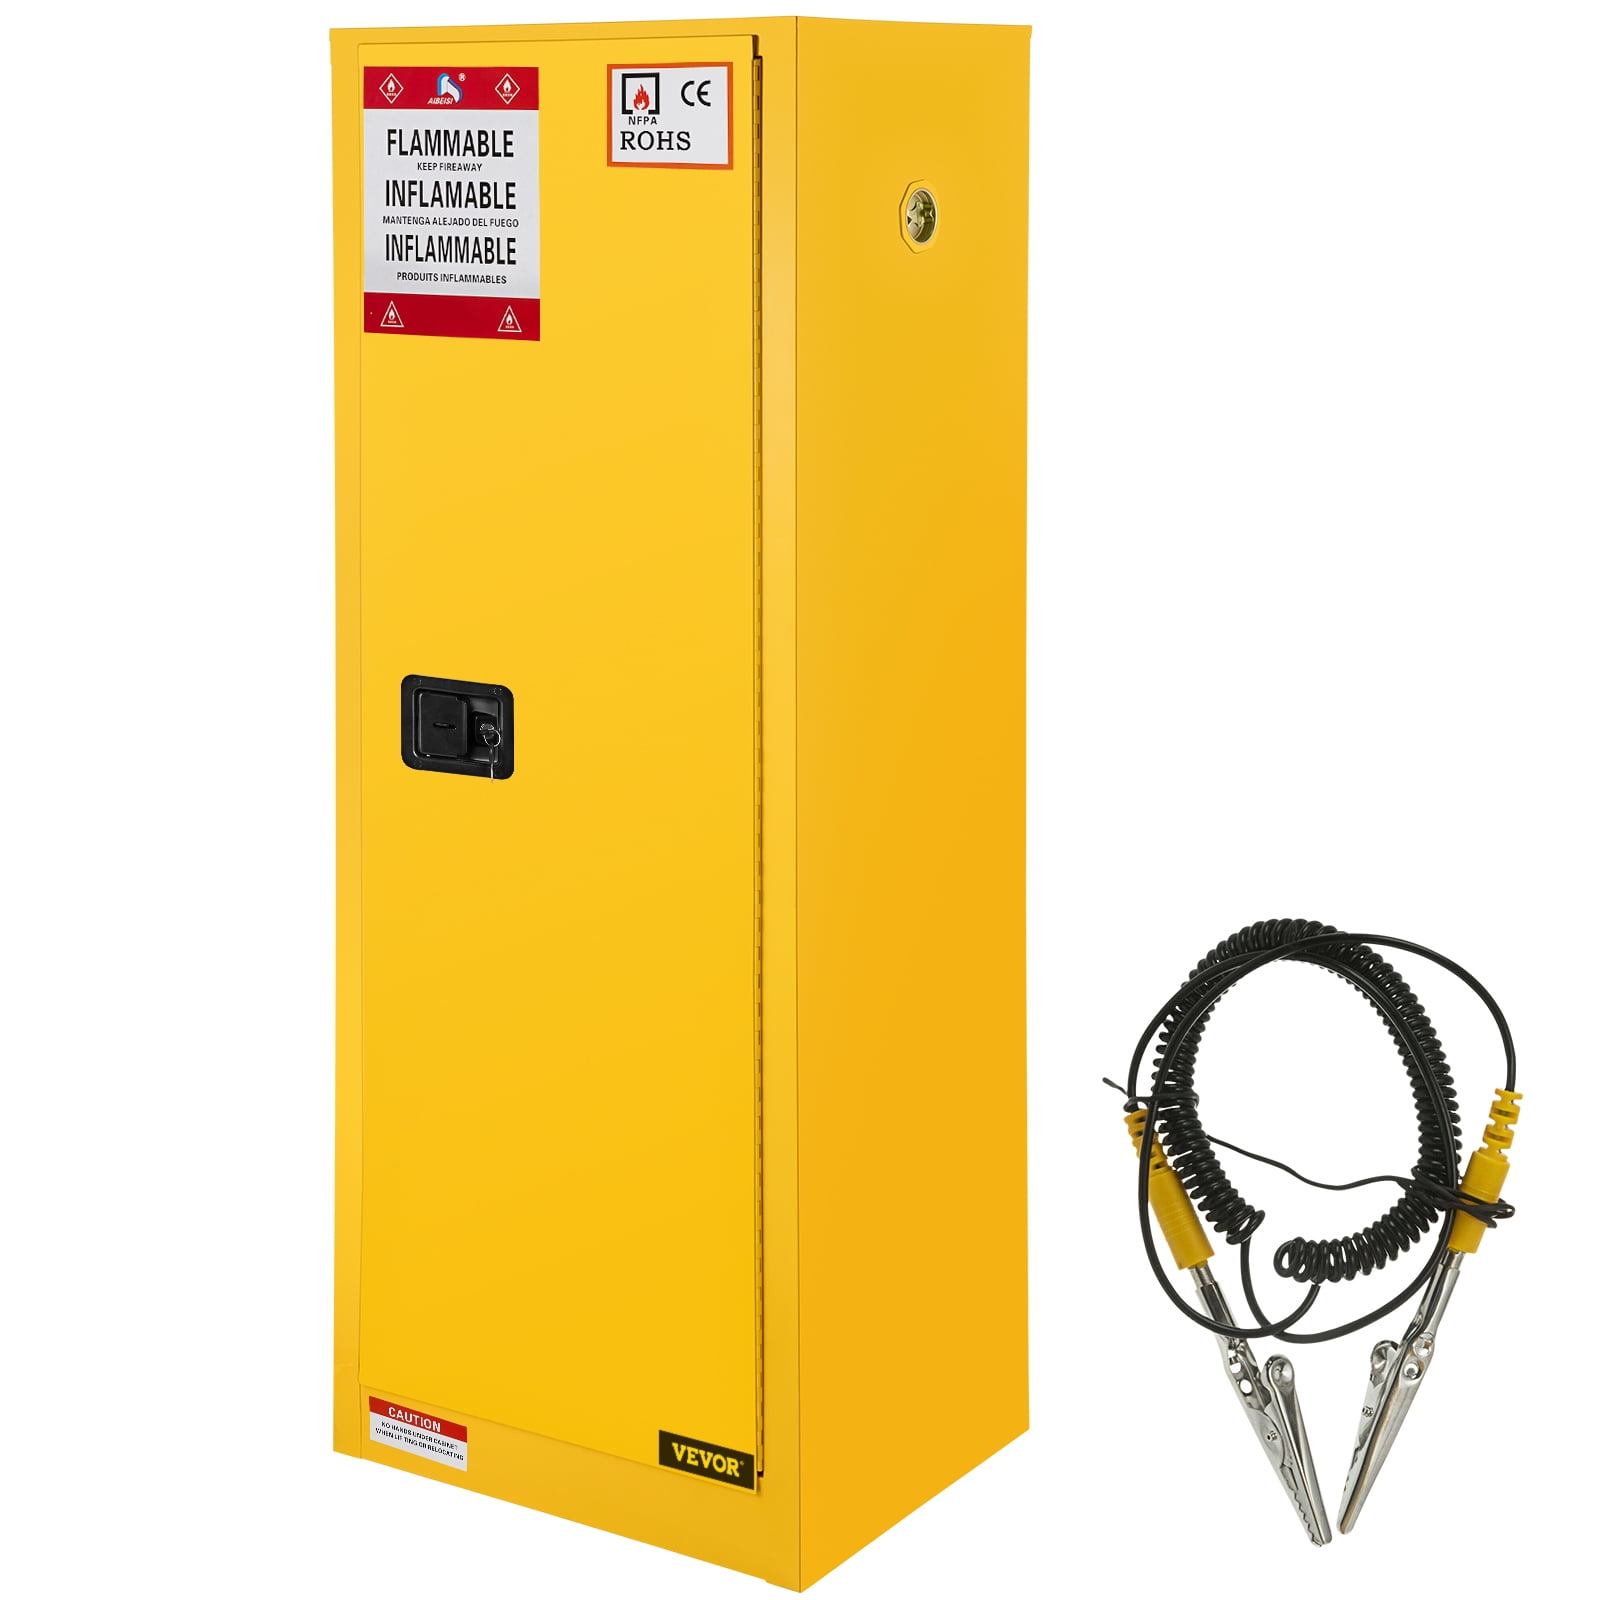 Flammable storage cabinet requirements for Workplace Safety